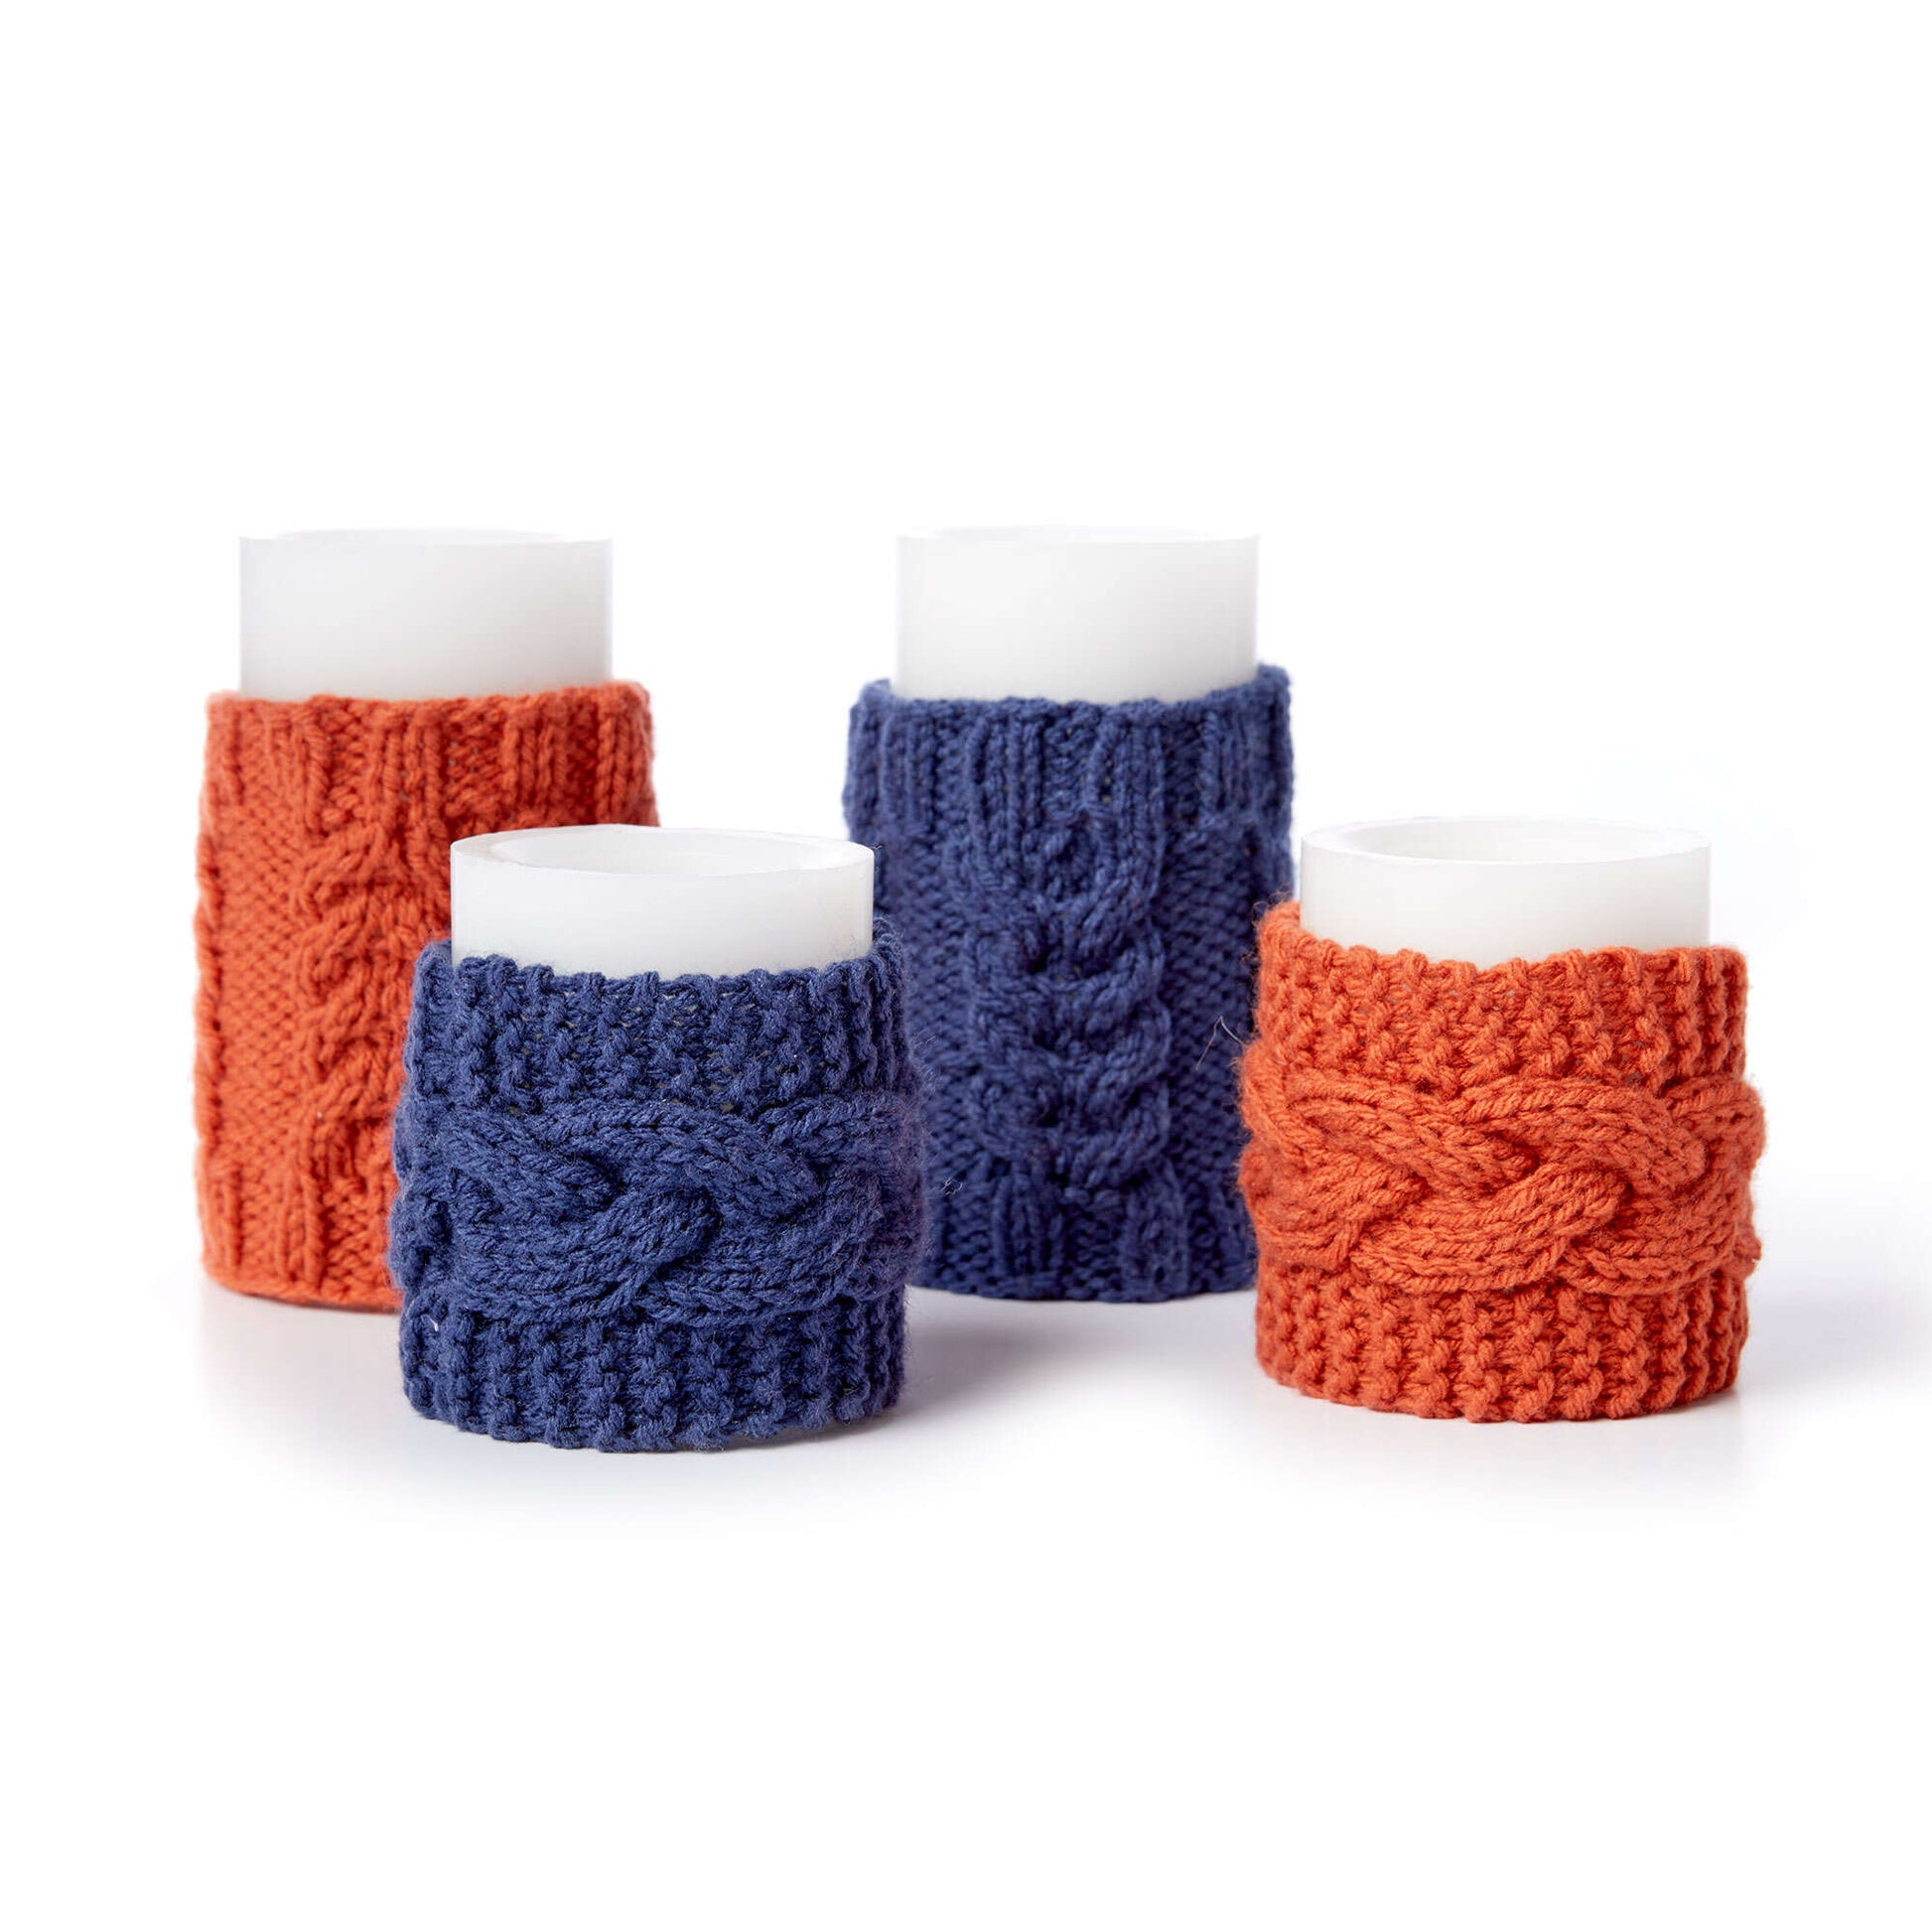 Free Bernat Knit Cable Candle Cozies Pattern